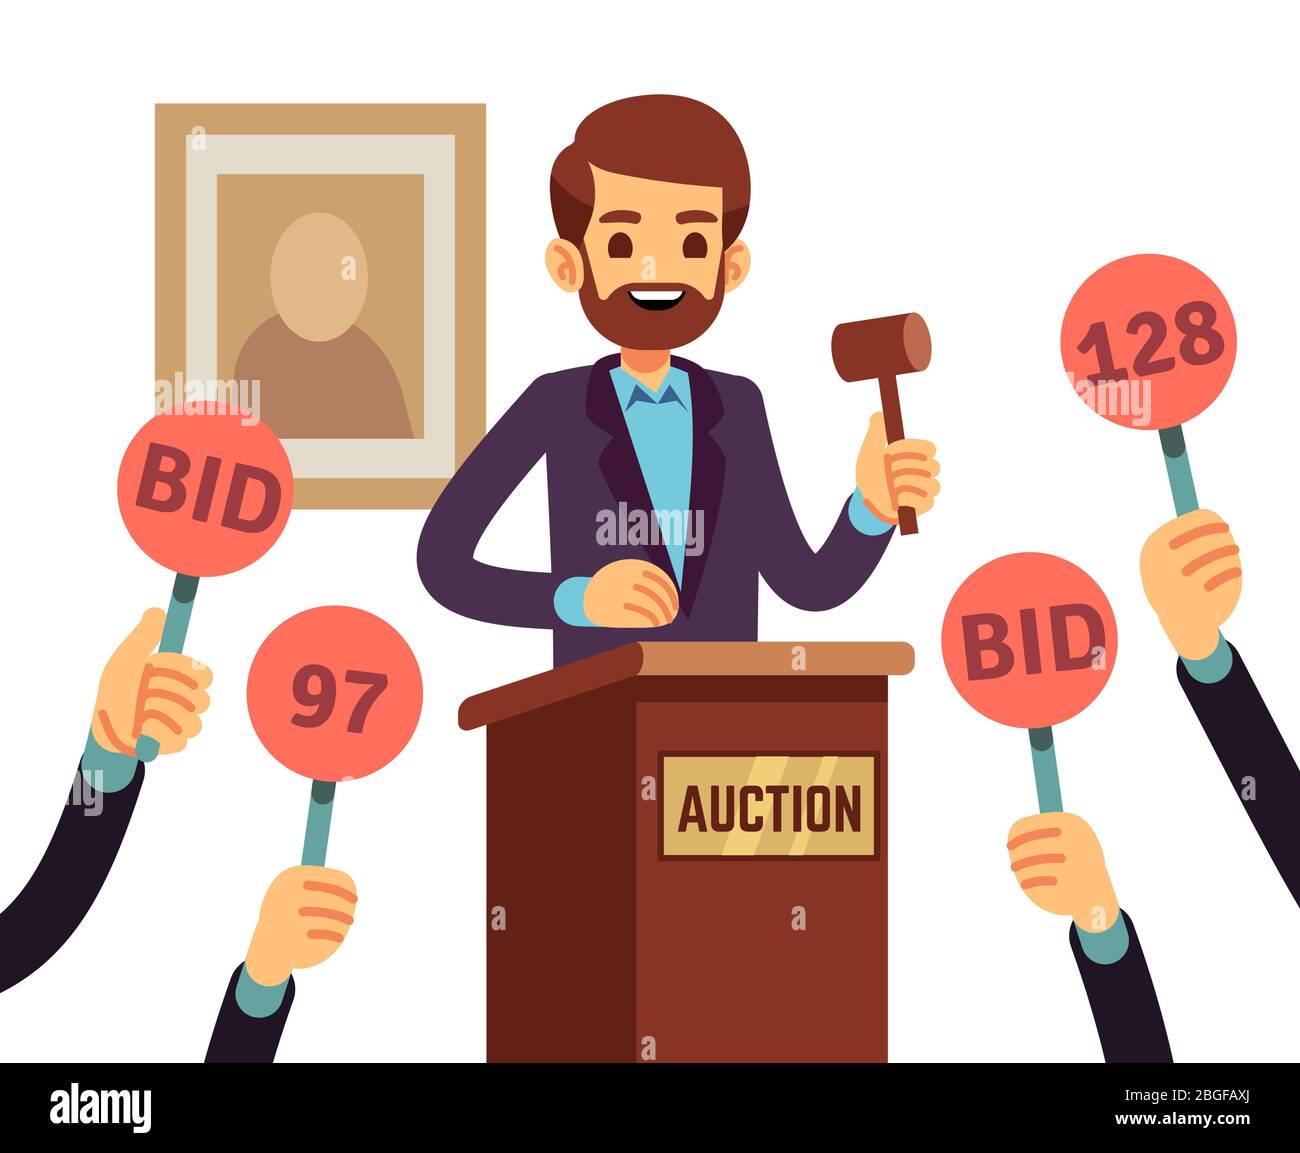 Auction with man holding gavel and people raised hands with bid paddles vector concept. Auction business, bid and sale, trade commercial illustration Stock Vector